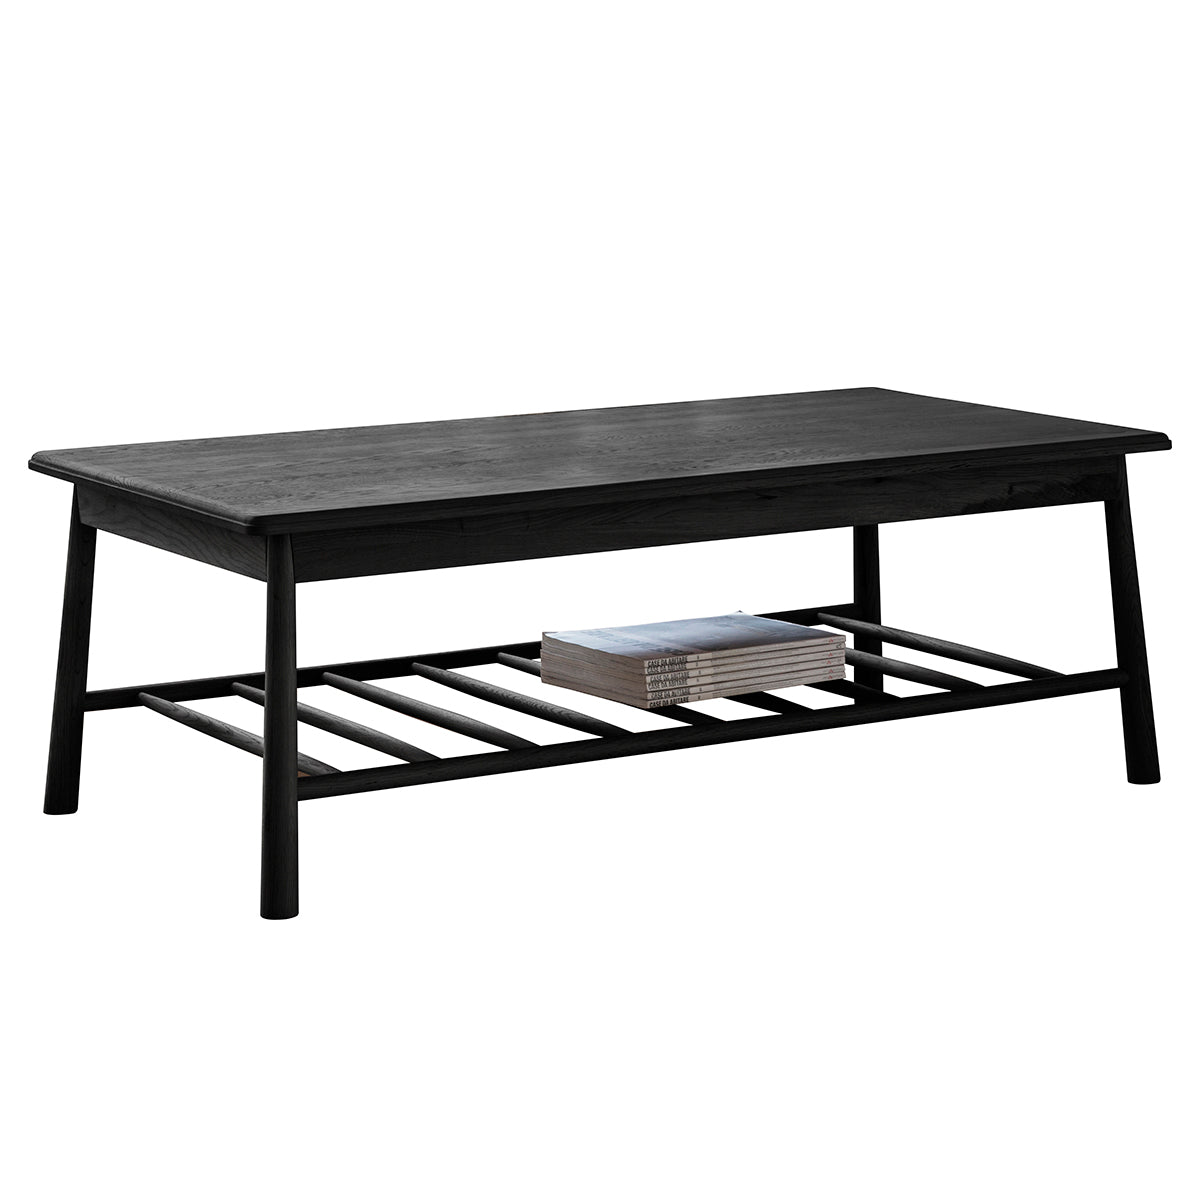 A Tigley Rect Coffee Table Black 1200x650x425mm with a shelf on top, perfect for interior decor and home furniture, from Kikiathome.co.uk.